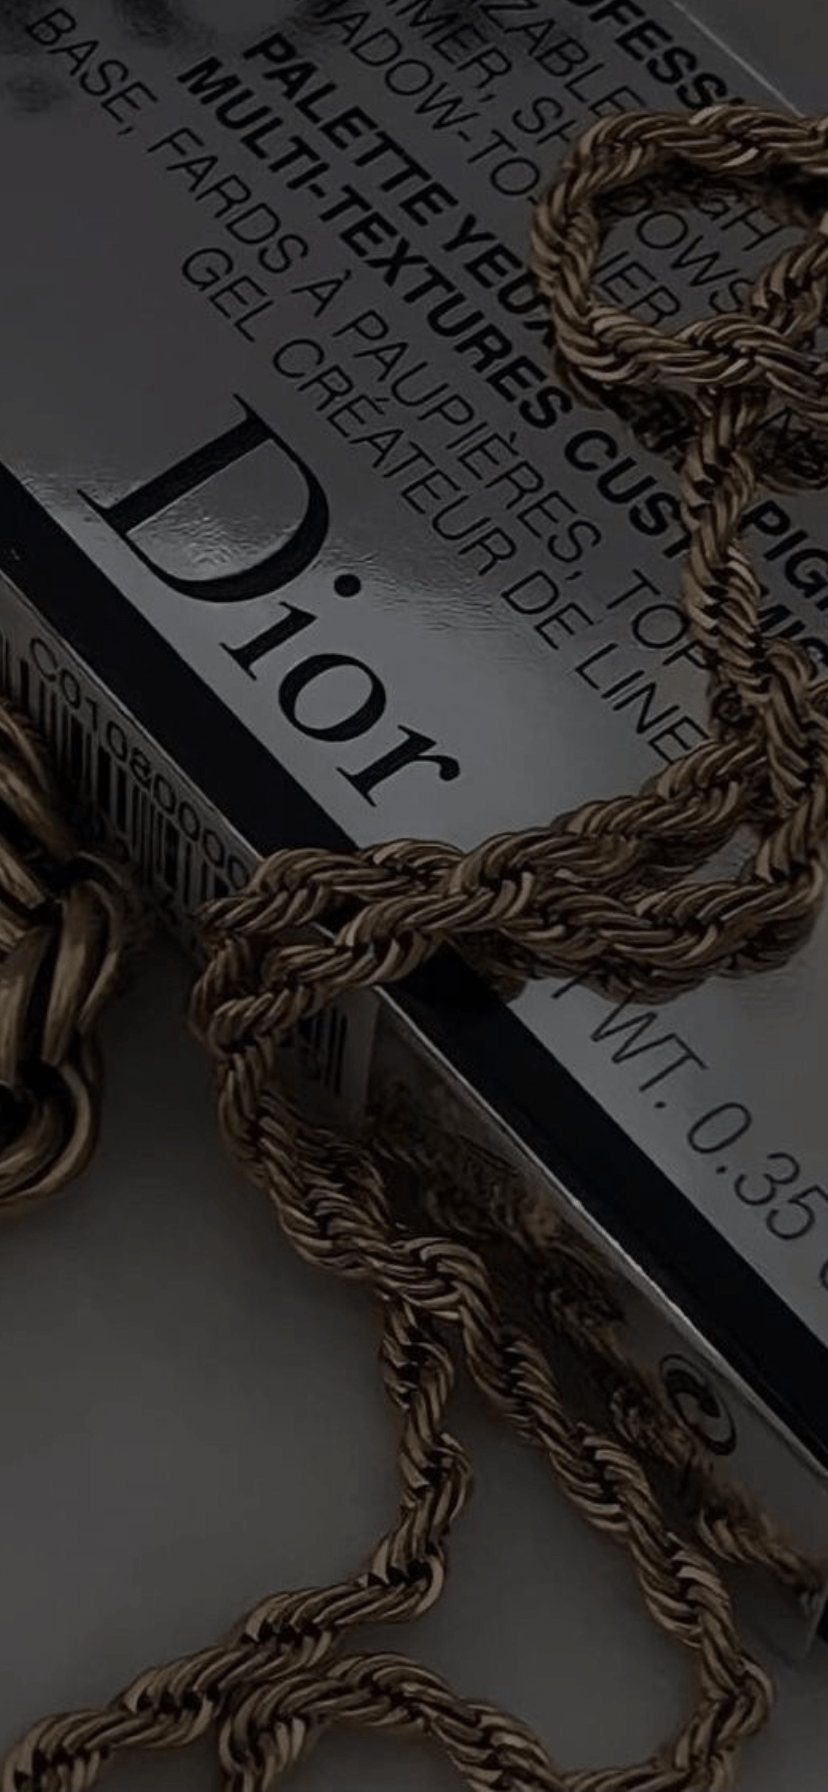 A close up of some gold chains - Dior